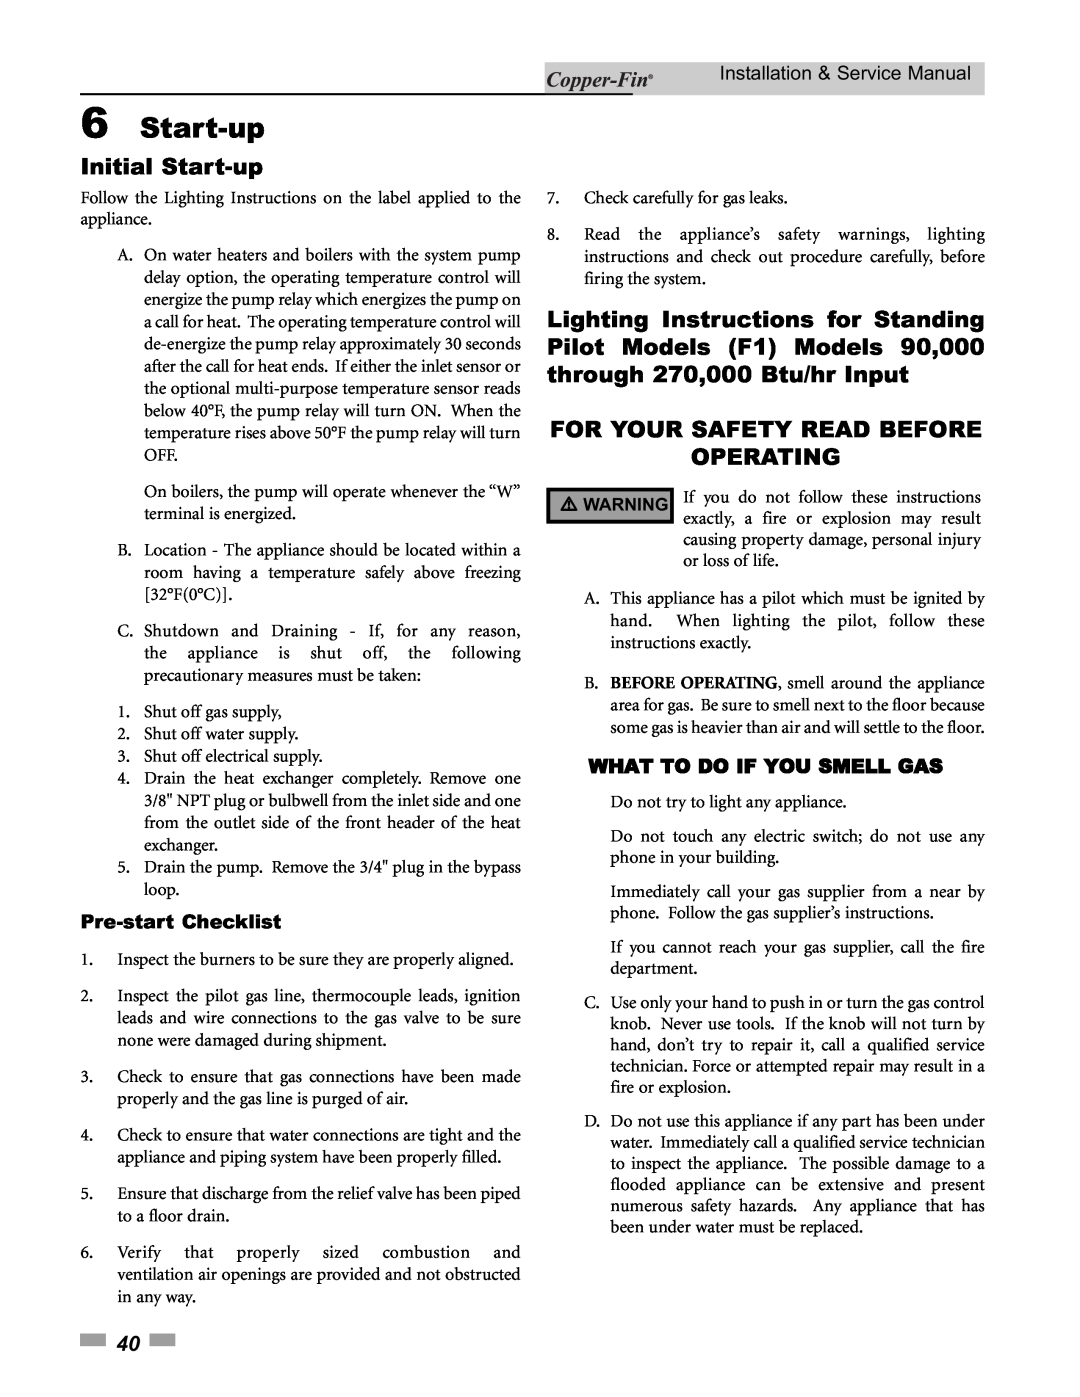 Lochinvar 500, 90 service manual 6Start-up, Initial Start-up, For Your Safety Read Before Operating, Pre-startChecklist 